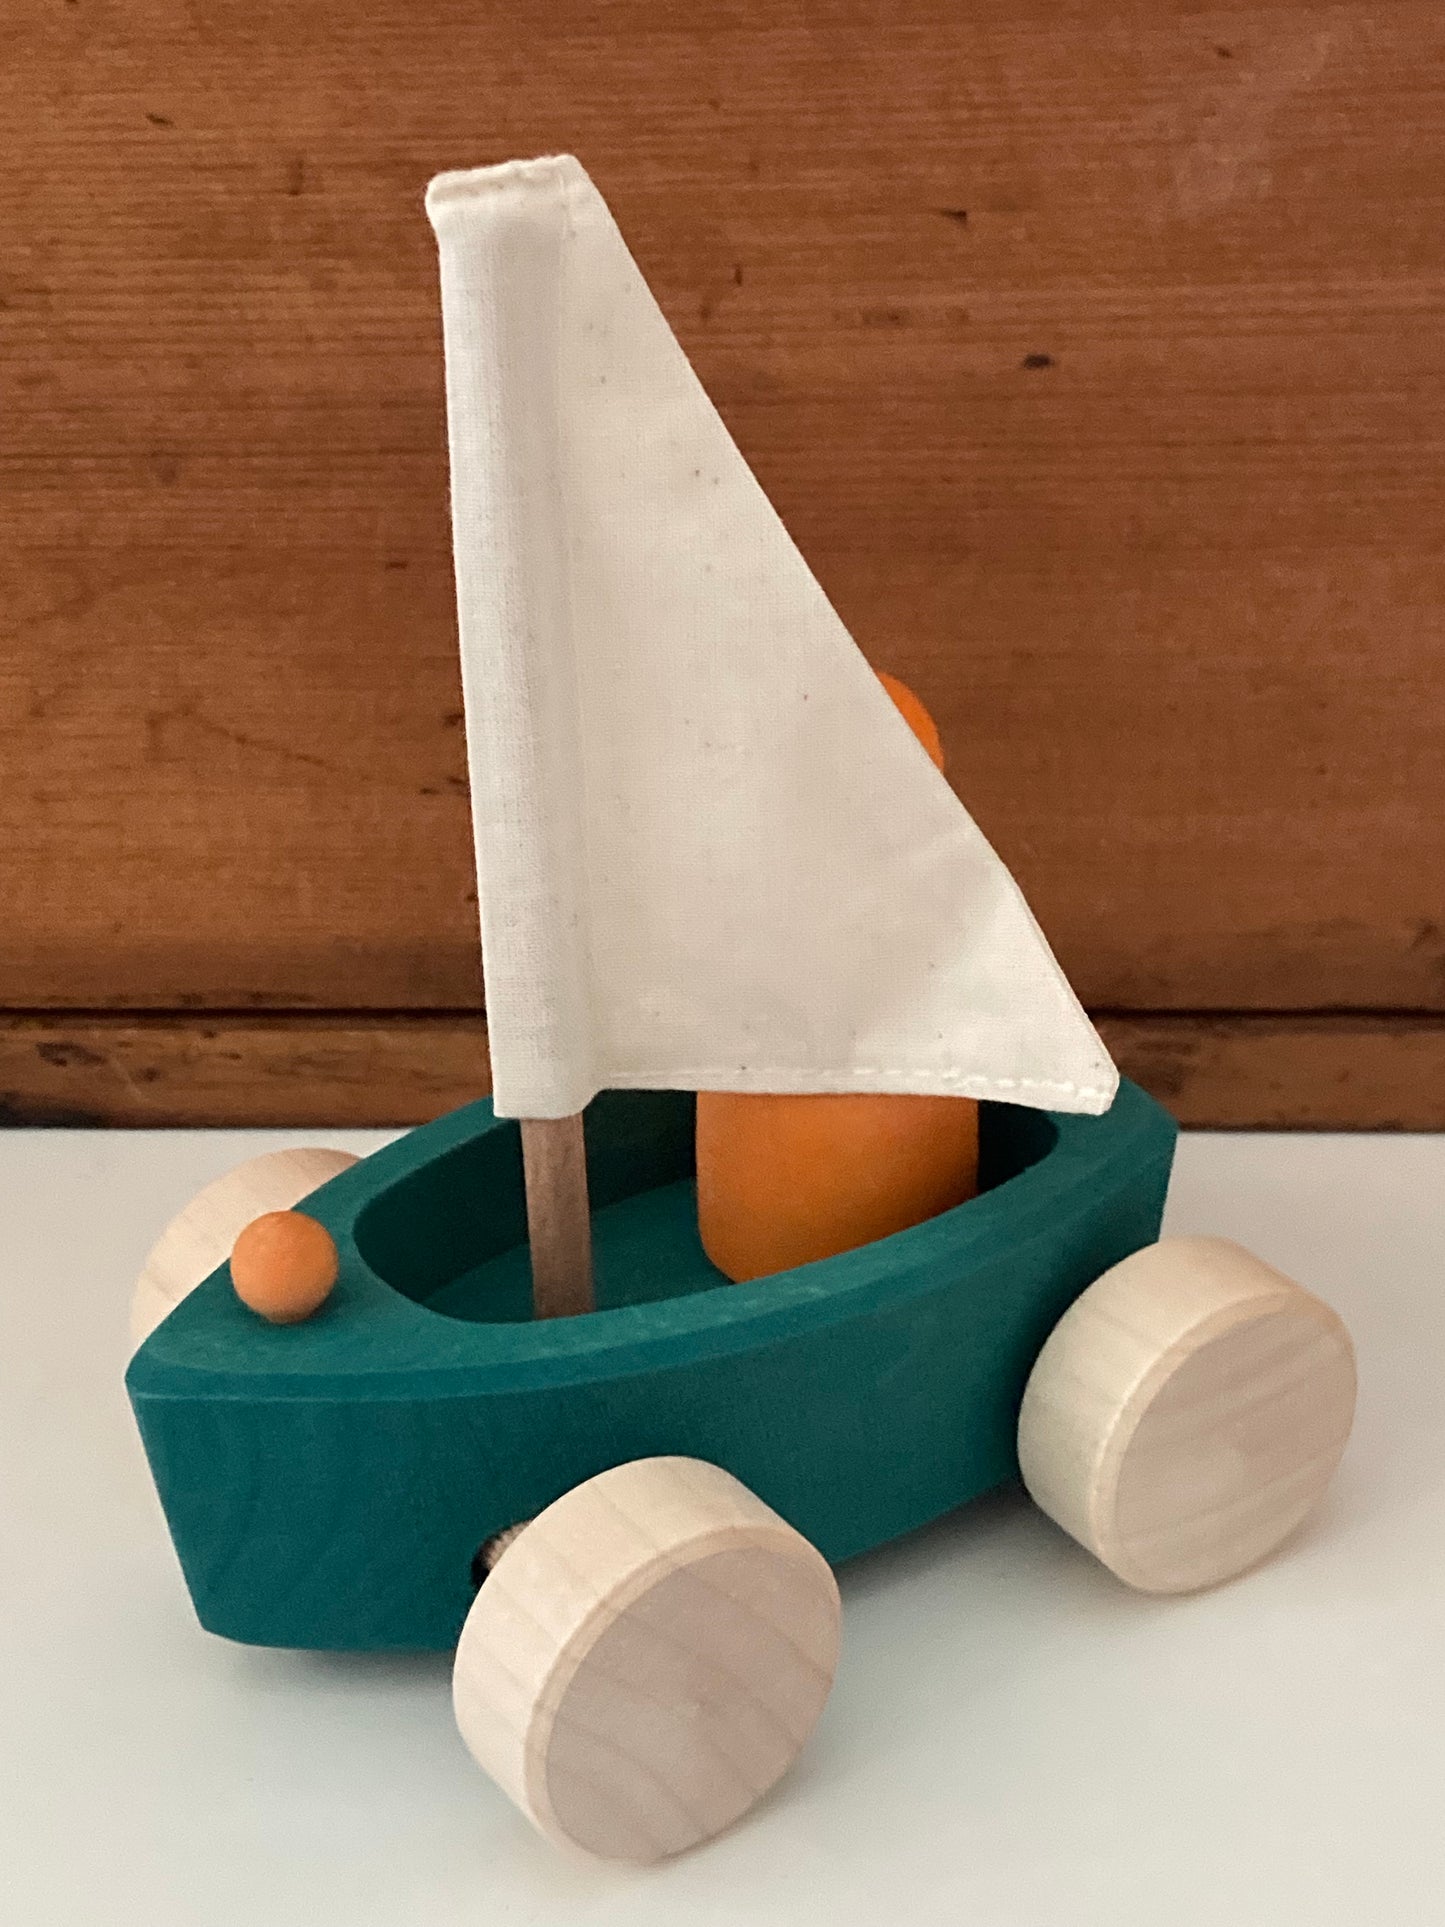 Wooden Toy - SAILBOAT in EVERGREEN and SKIPPER in ORANGE… on wheels!